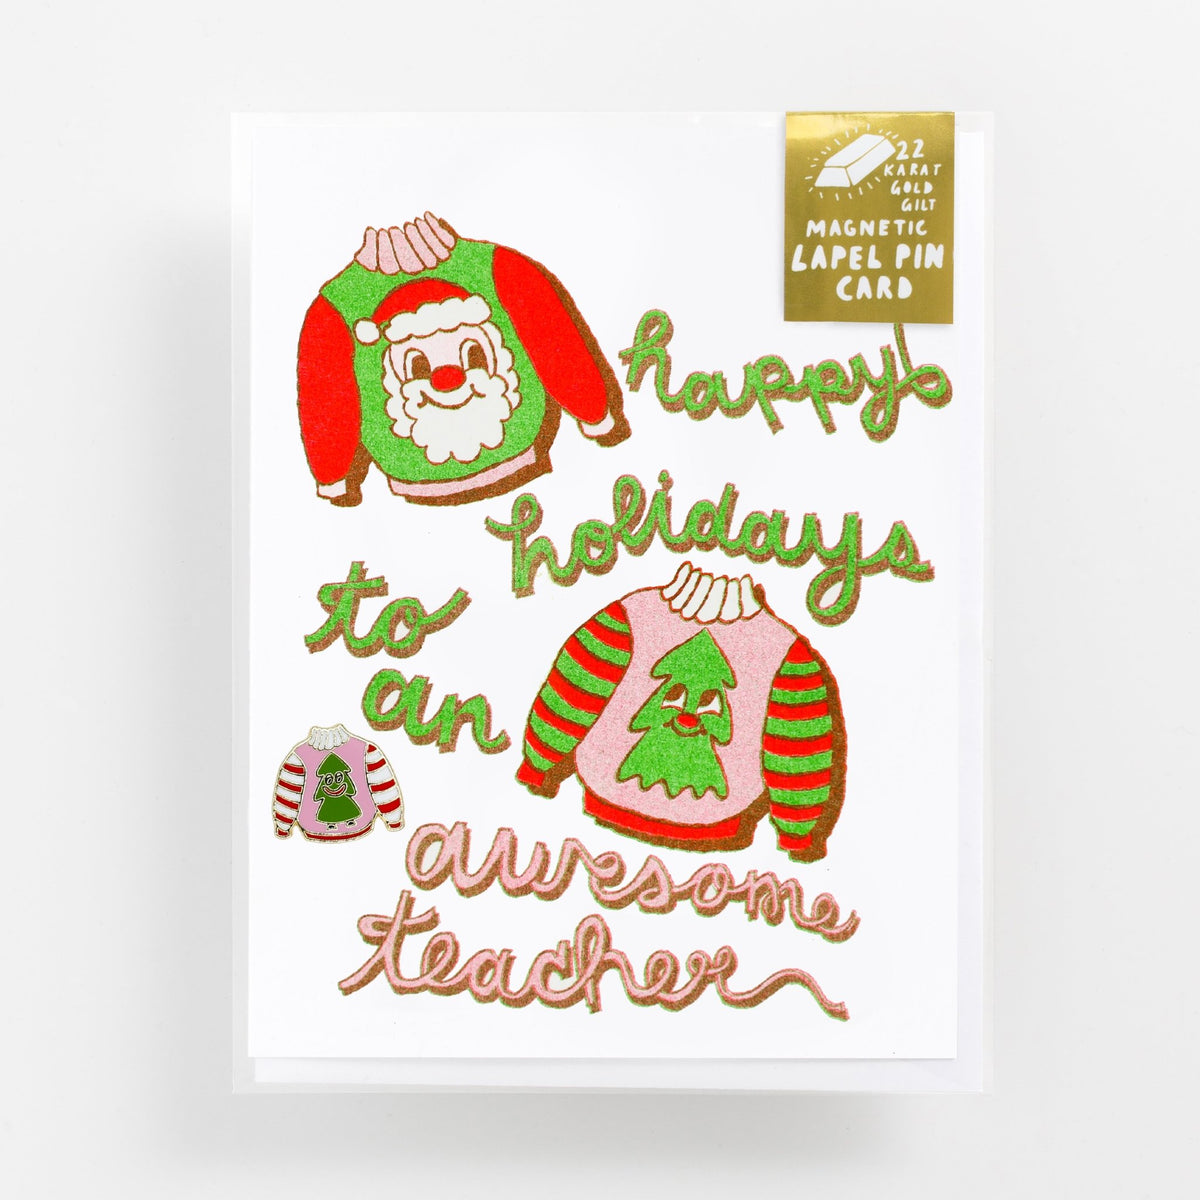 Happy Holidays to an Awesome Teacher - Lapel Pin Card - Yellow Owl Workshop